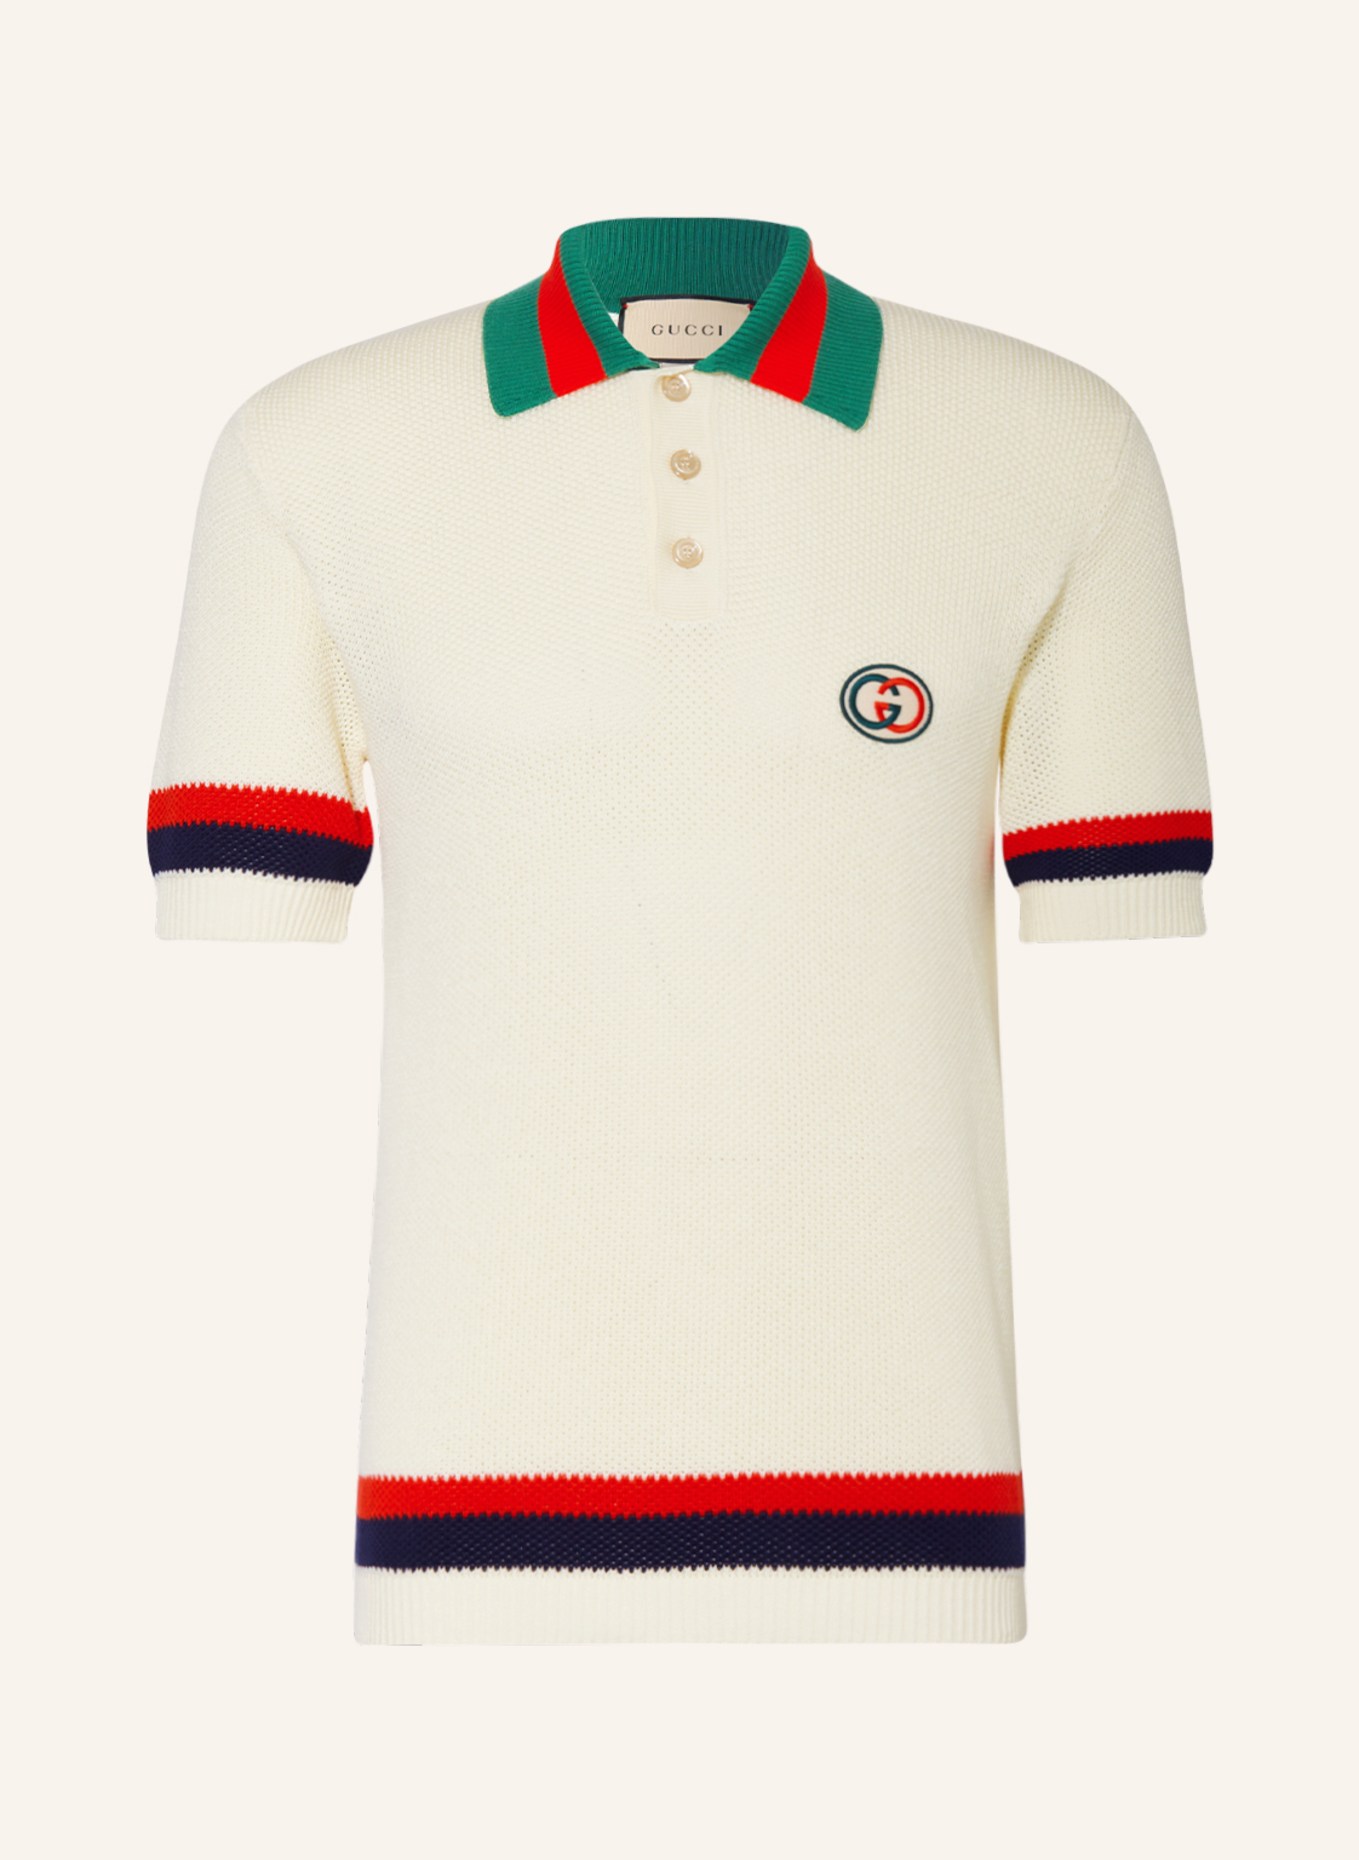 GUCCI Knitted polo shirt, Color: ECRU/ RED/ DARK BLUE (Image 1)